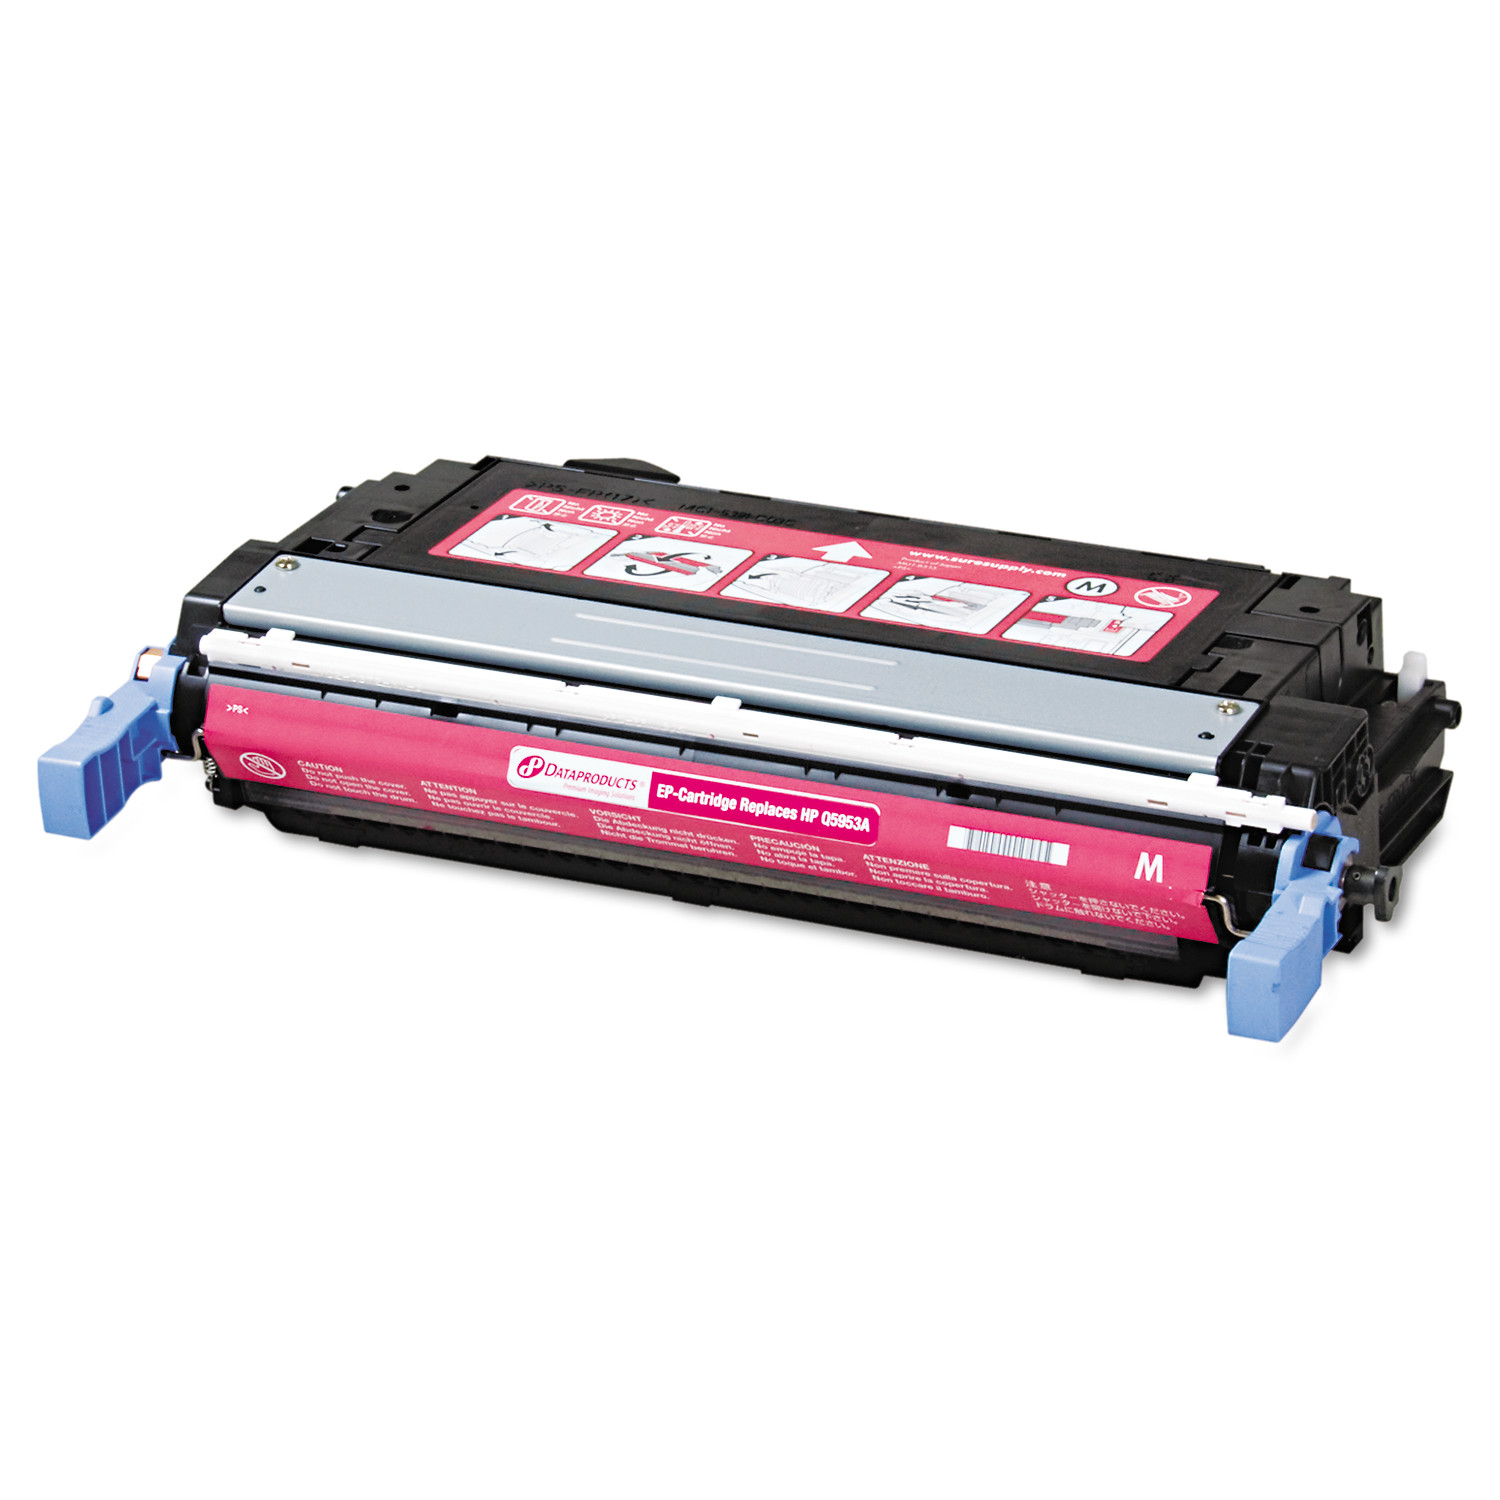 Dataproducts Remanufactured Q5953A (643A) Toner, Magenta - image 1 of 2